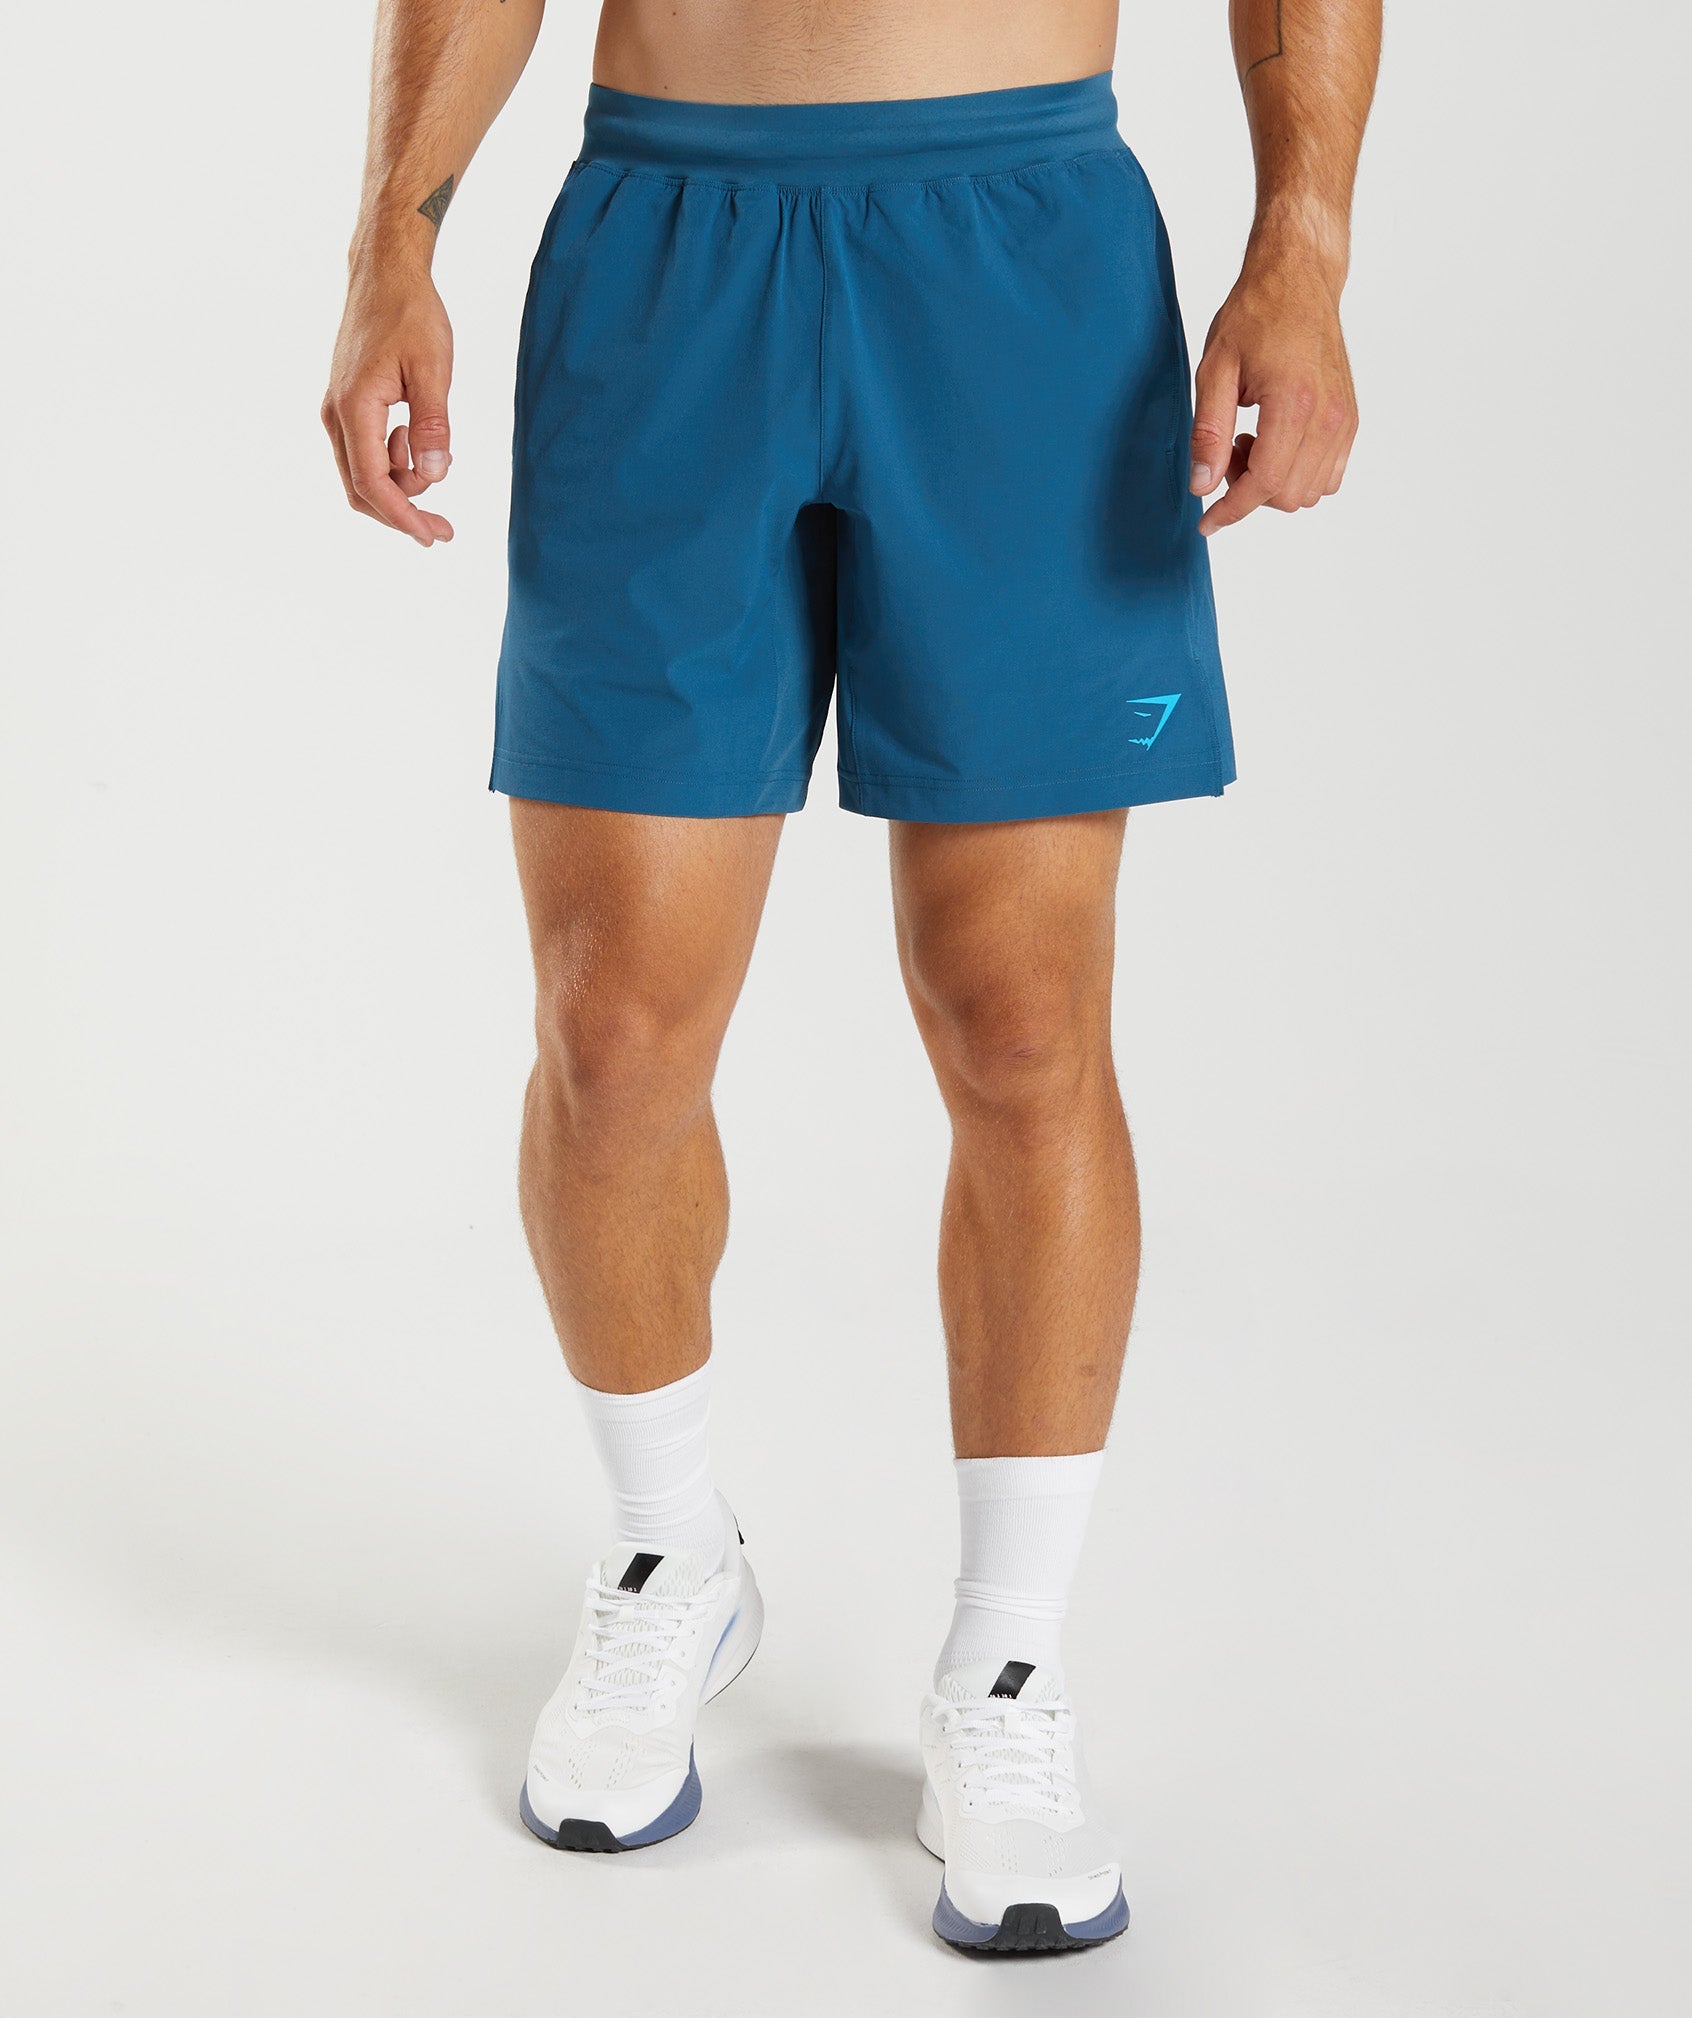 Apex 8" Function Shorts in Atlantic Blue - view 1